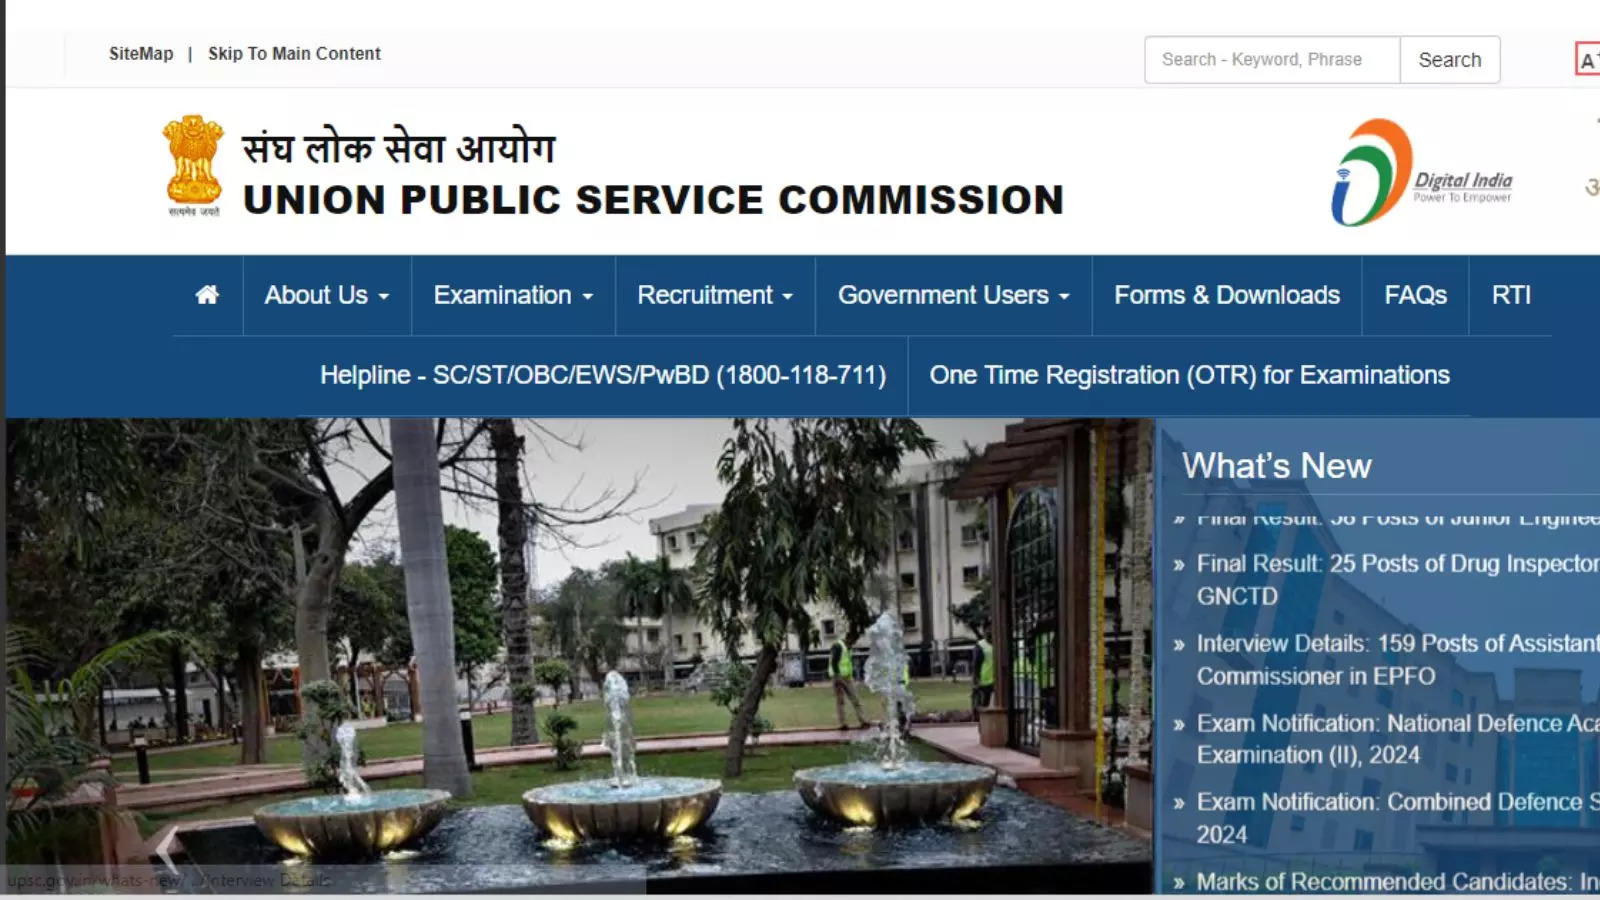 UPSC Prelims 2024: When will the UPSC Prelims Admit Card come? Download link will be available on upsc.gov.in